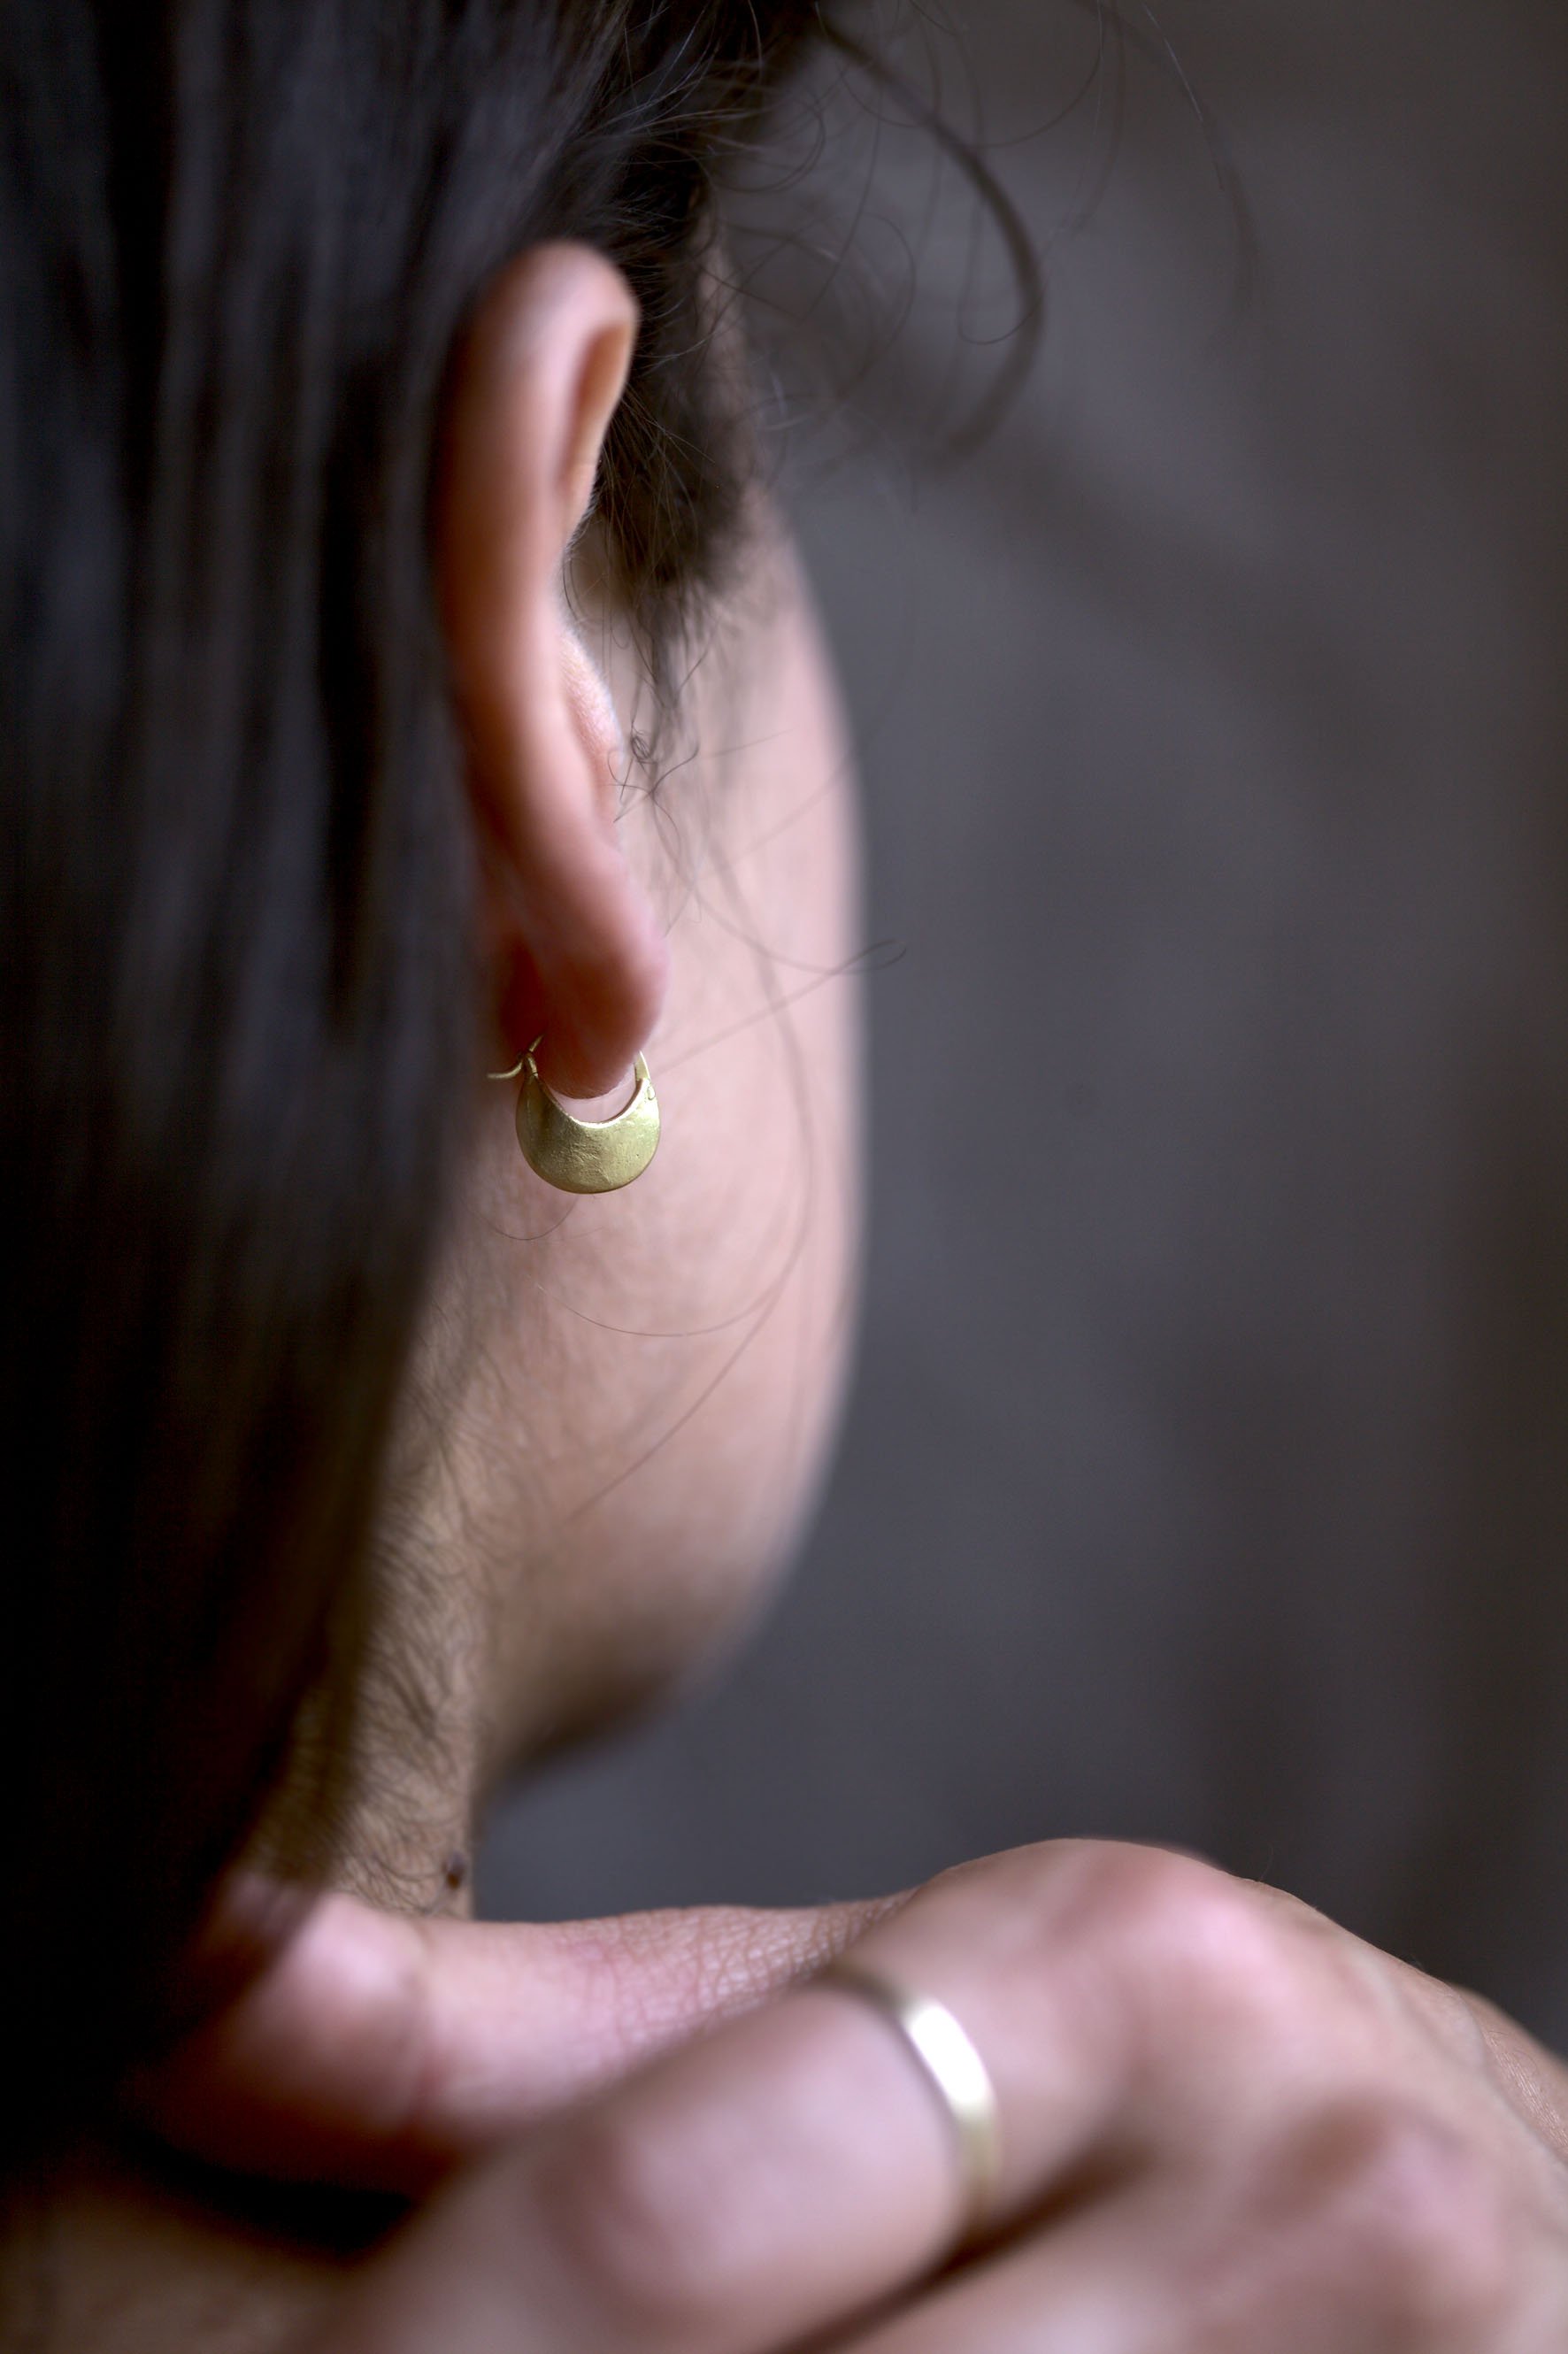 Close up portrait photograph by Hatty Frances Bell of ear and gold hoop earring shot from behind